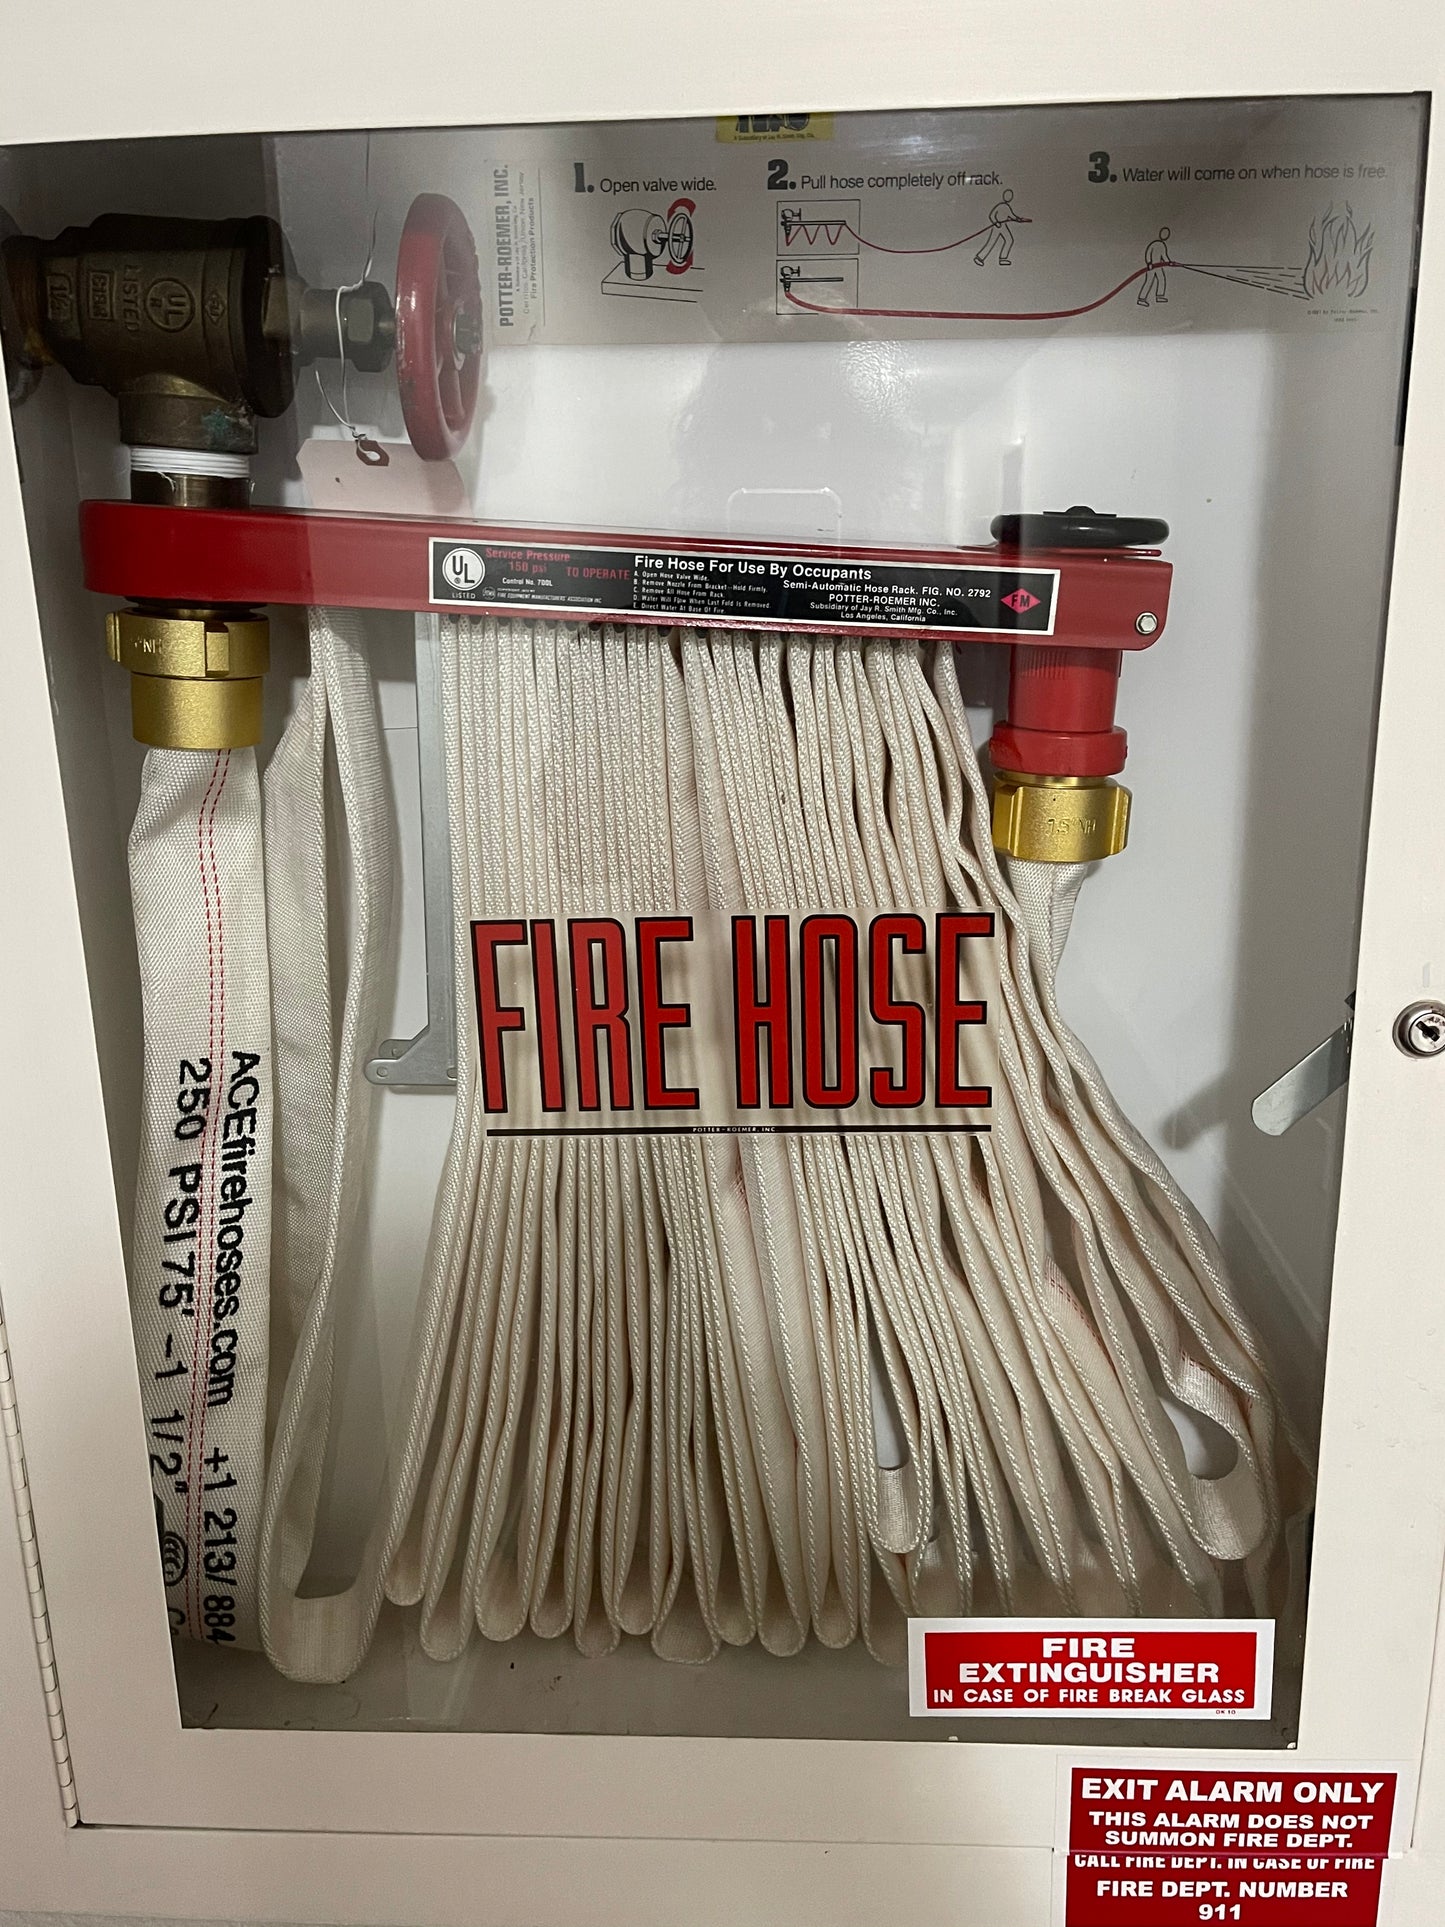 1 1/2 Fire Hose - Rack & Reel Hose With Brass Coupling, NST